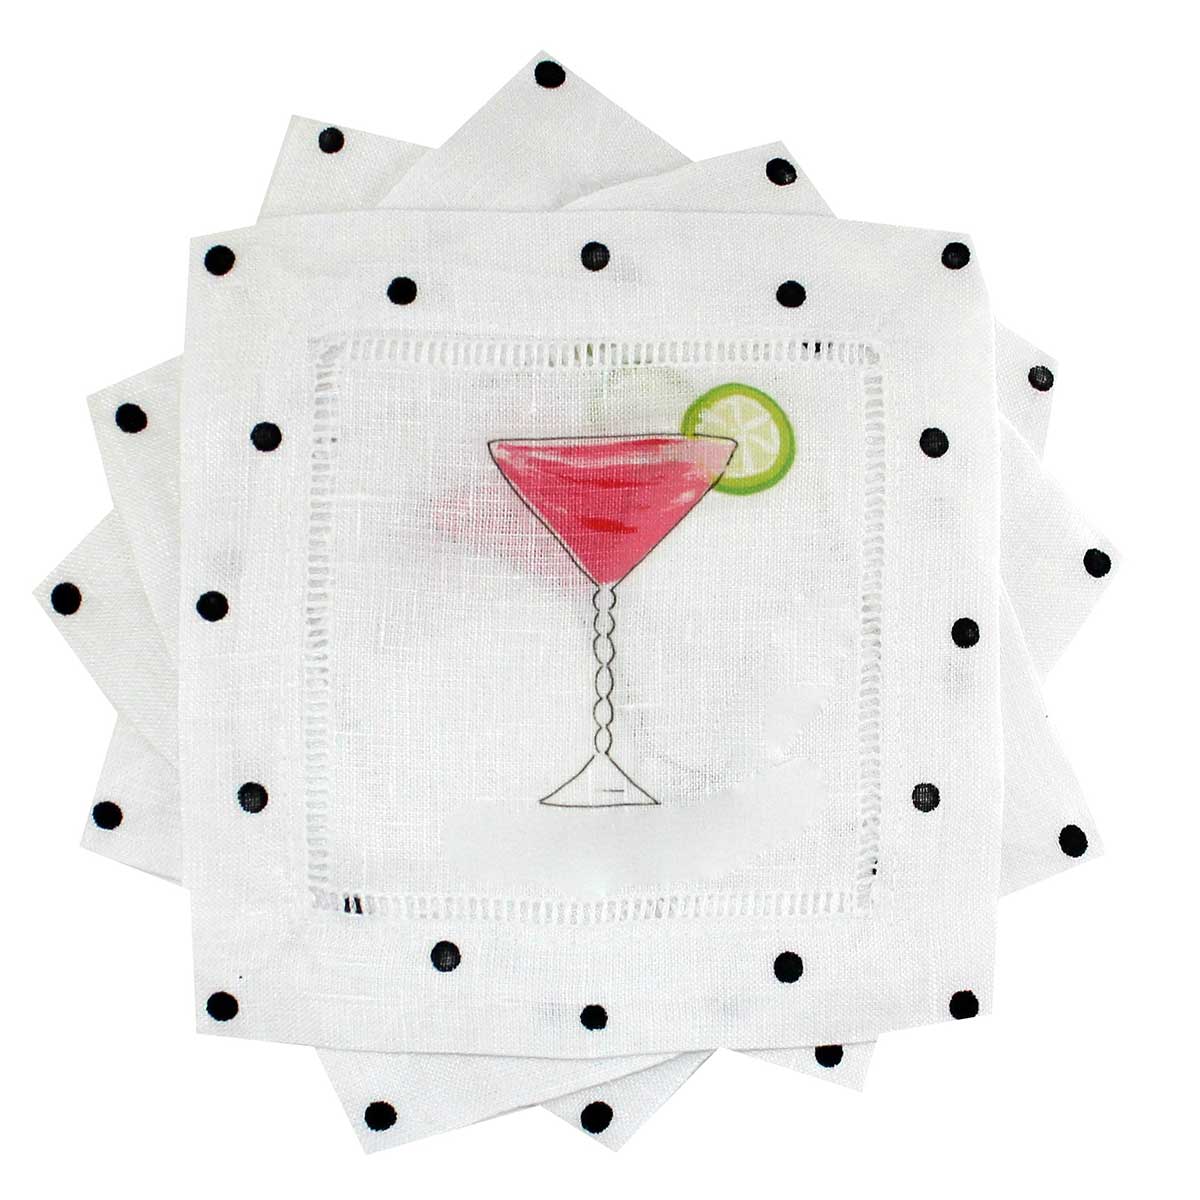 Pink Cosmo Linen Cocktail Napkins